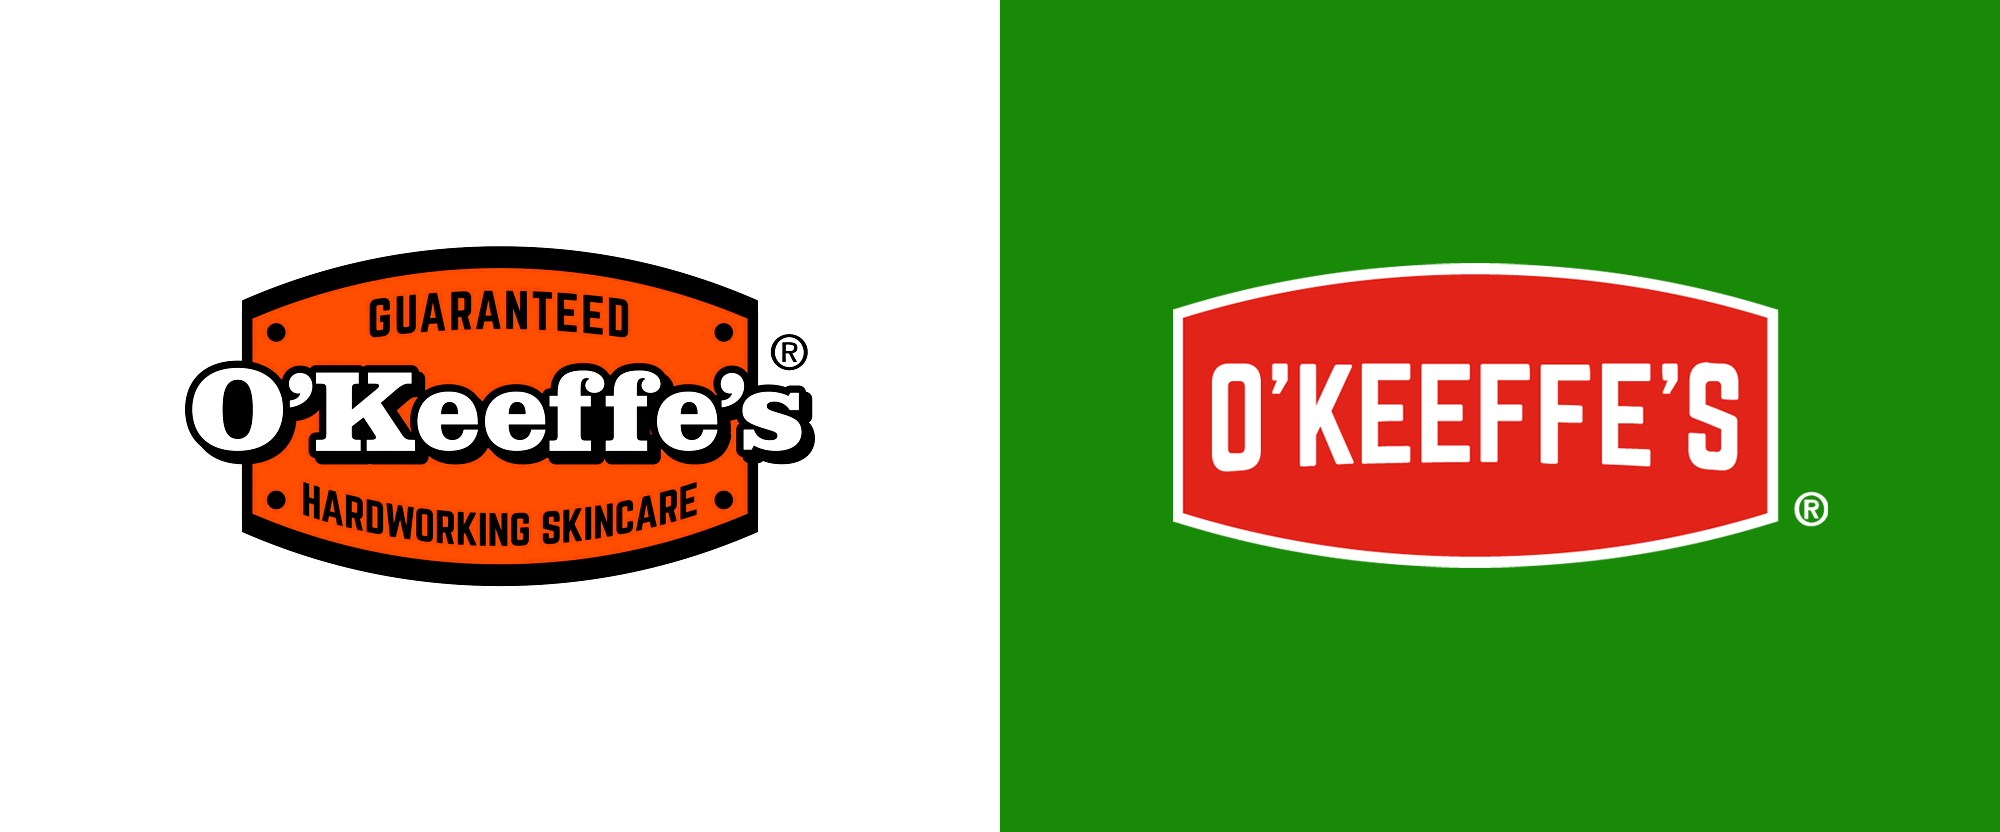 New Logo and Packaging for O’Keefe’s